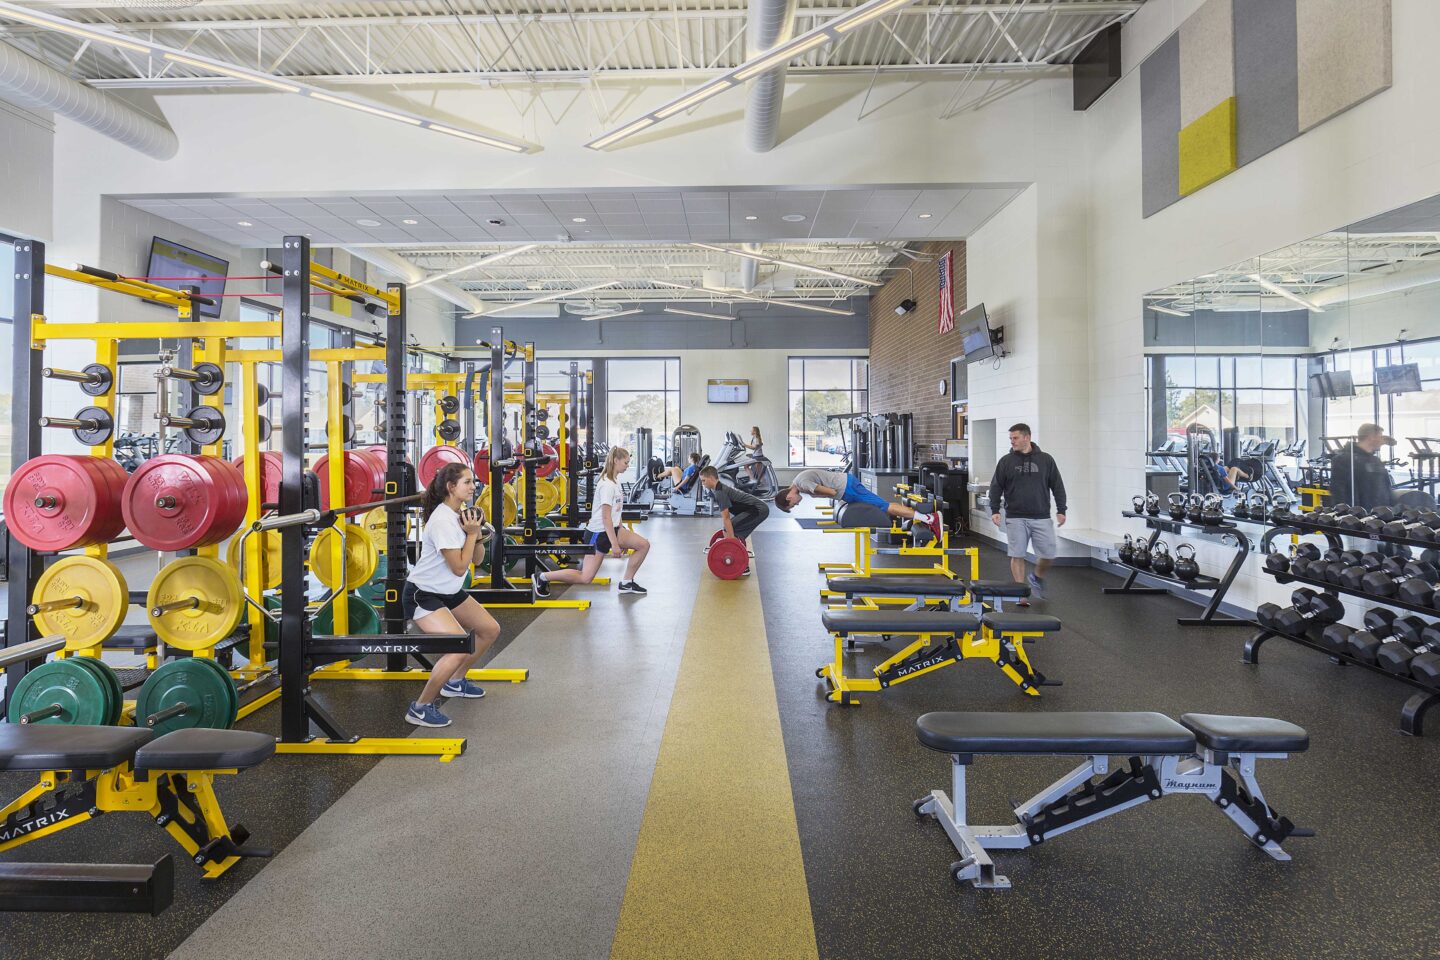 Students use weights and other fitness equipment in a large, windowed athletics area